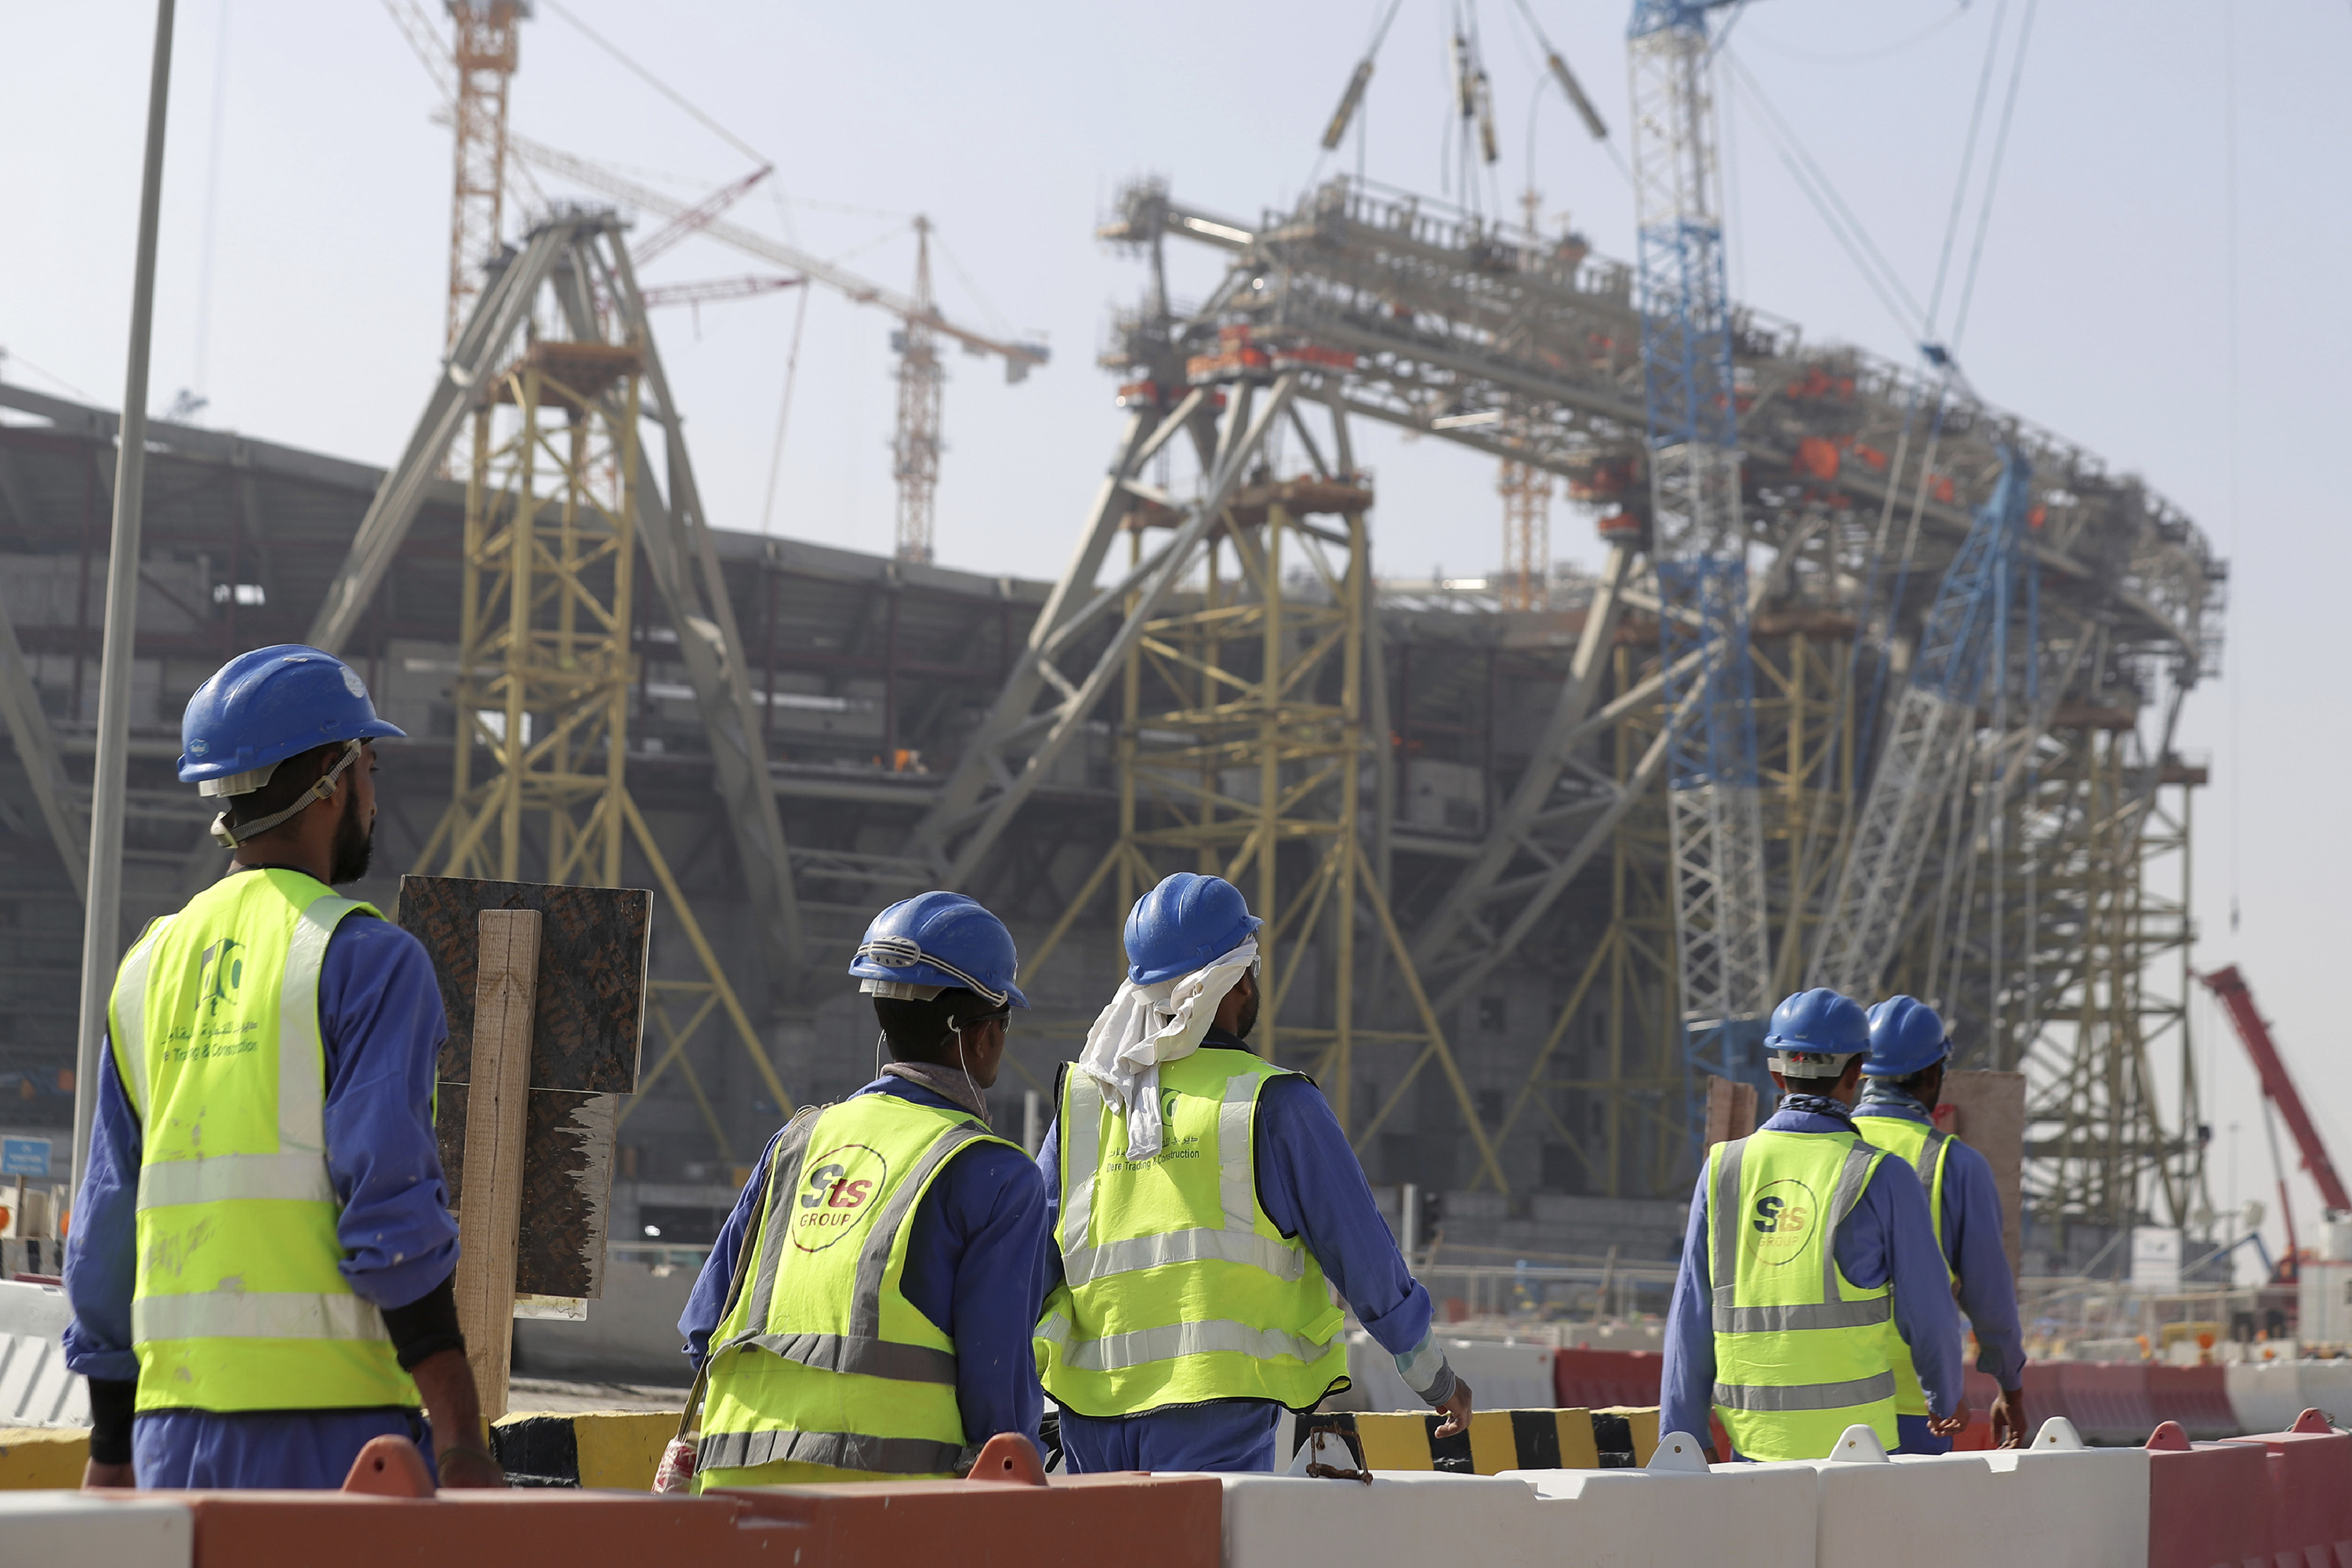 Just 12% of Qatar’s 2.7 million residents and 5% of its workforce are local.